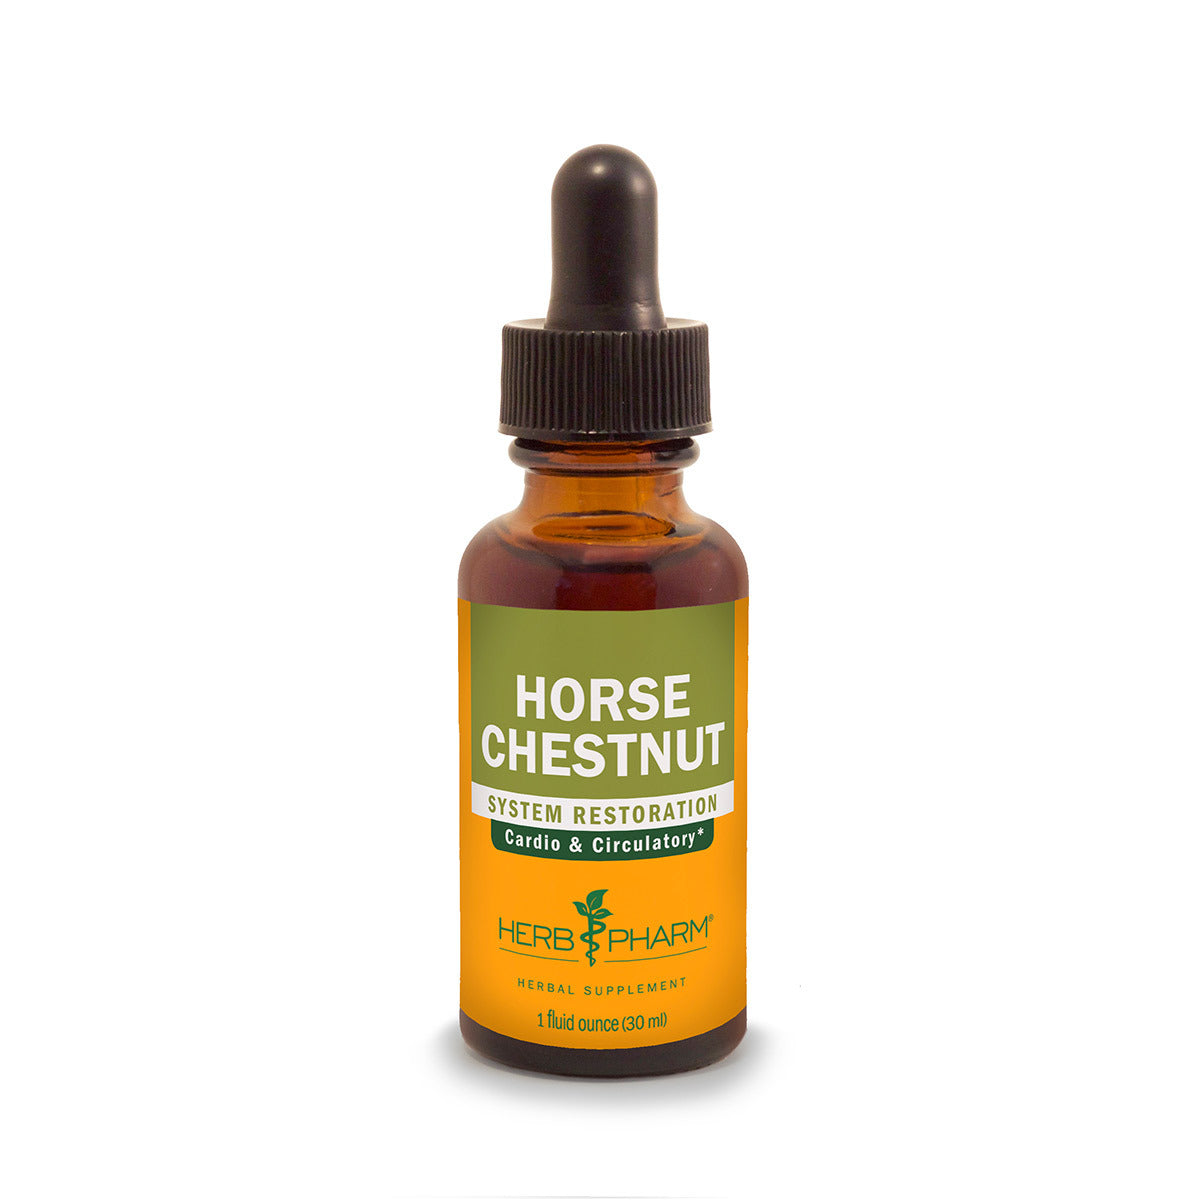 Primary image of Horse Chestnut Extract